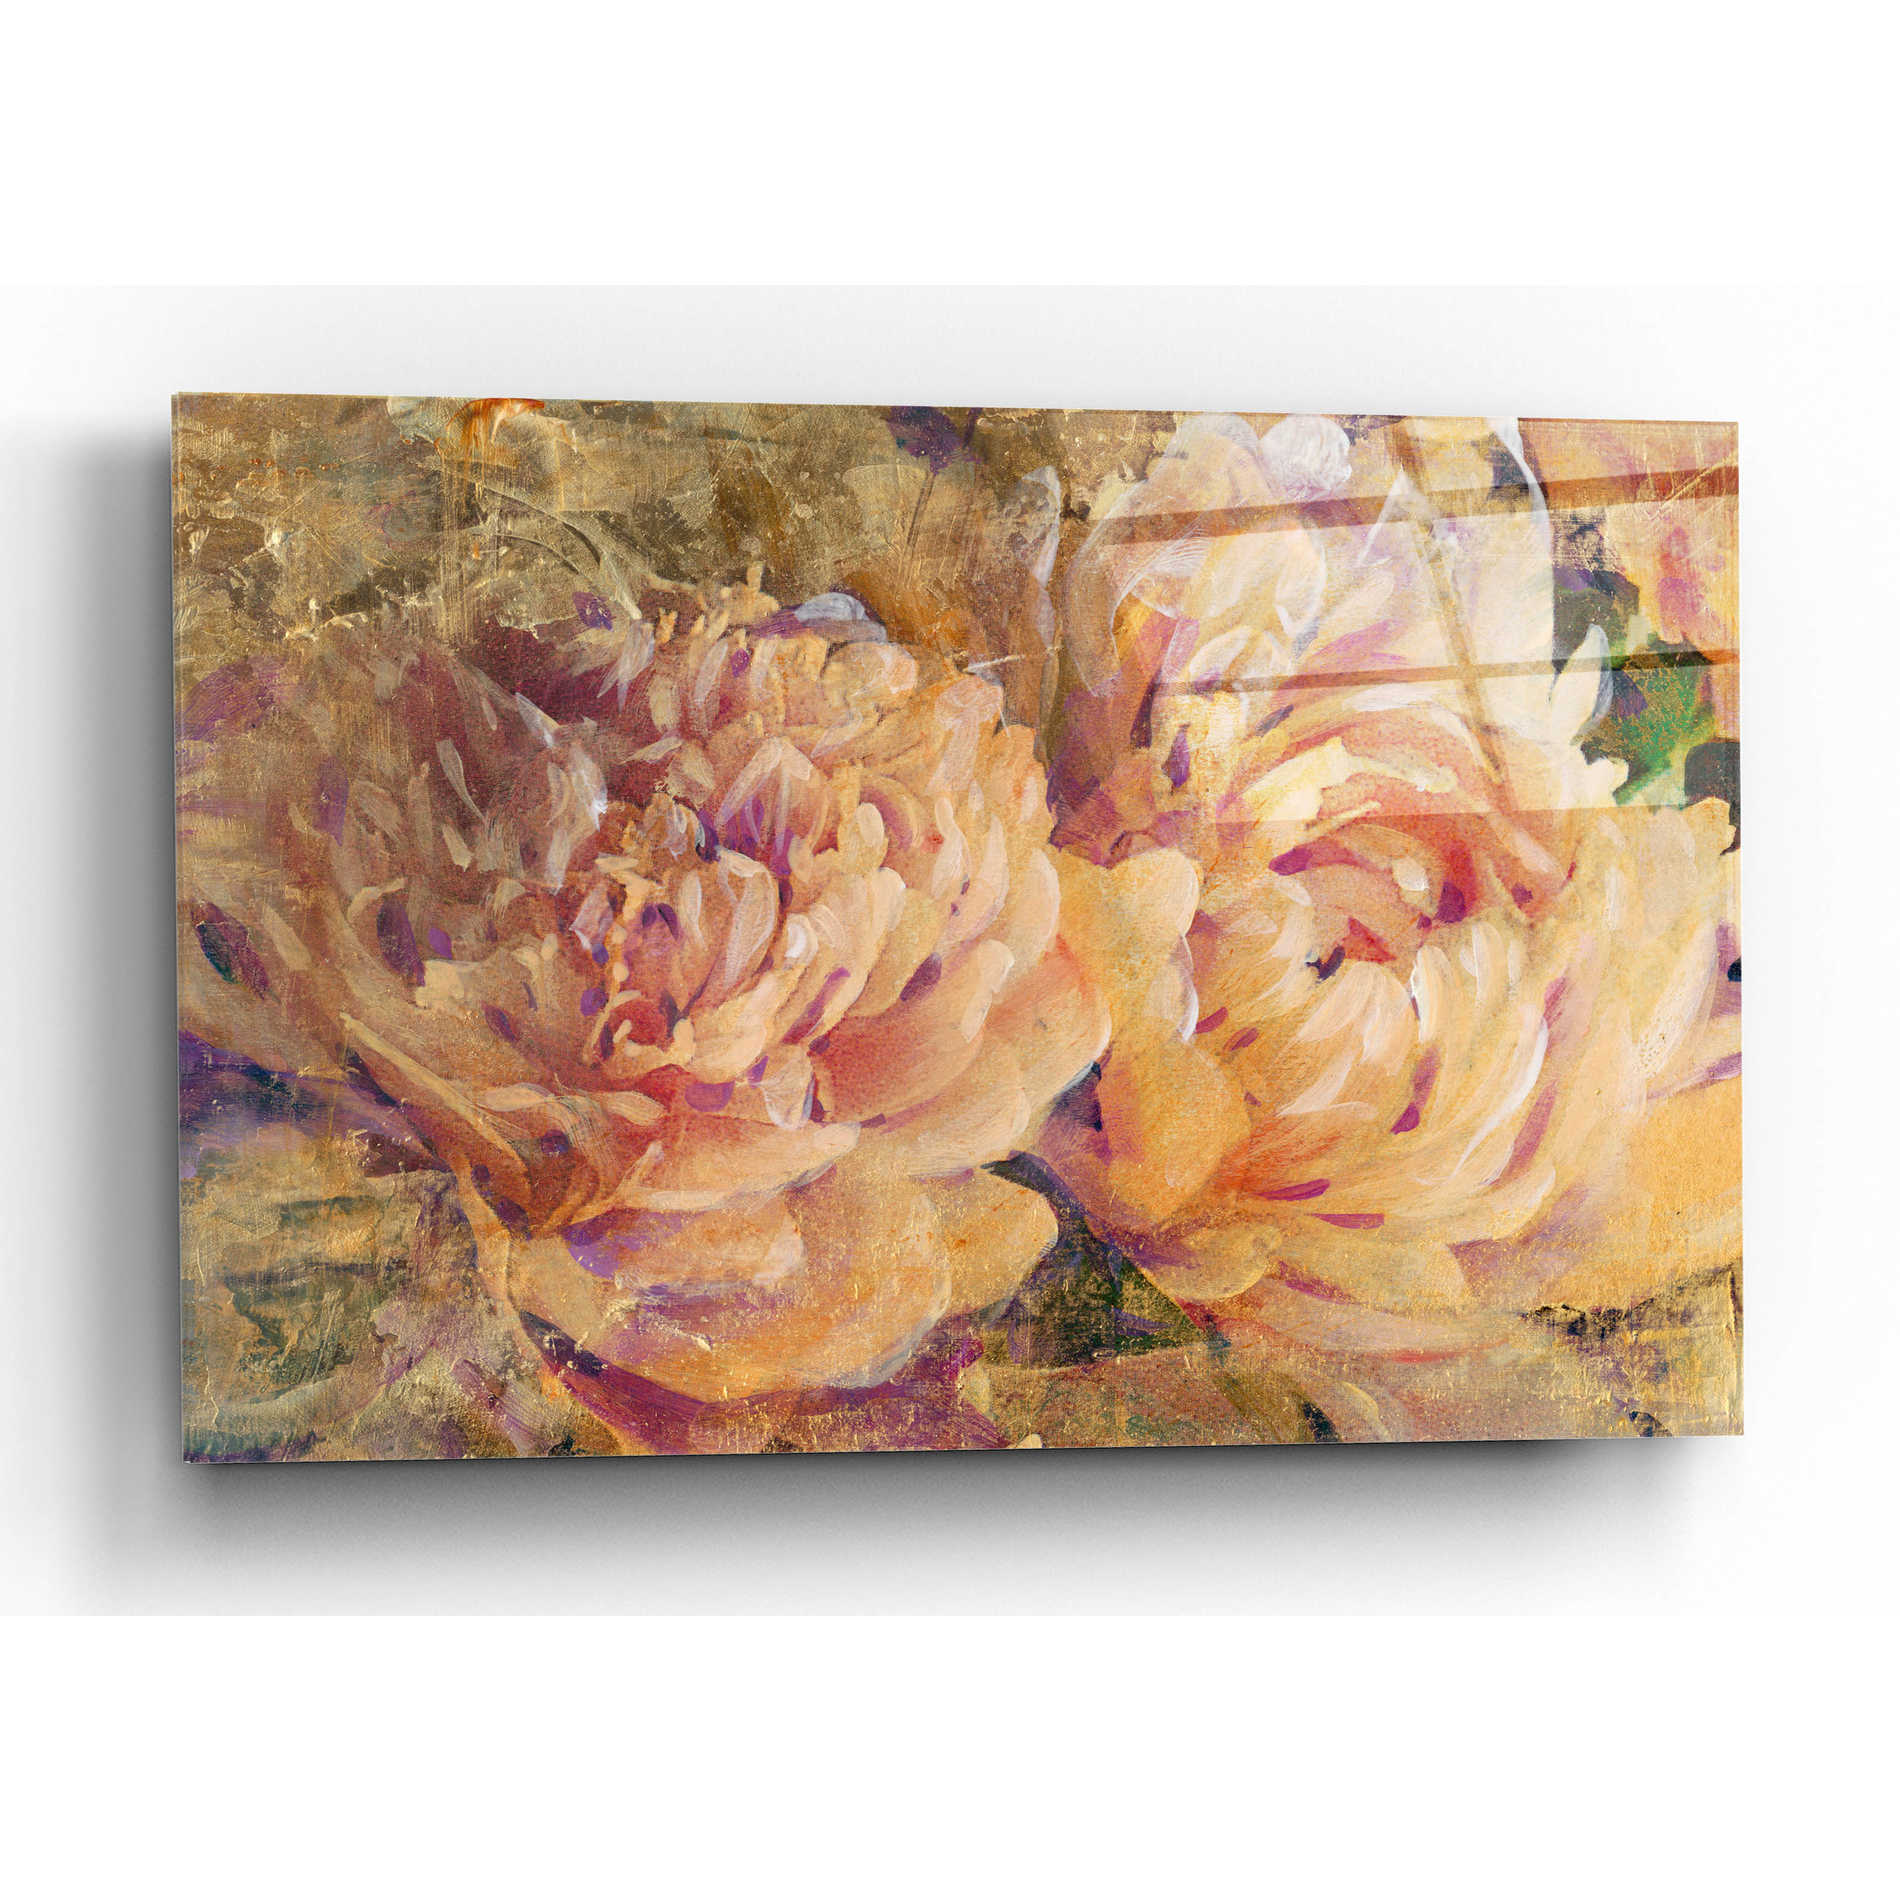 Epic Art 'Floral in Bloom III' by Tim O'Toole, Acrylic Glass Wall Art,24x16